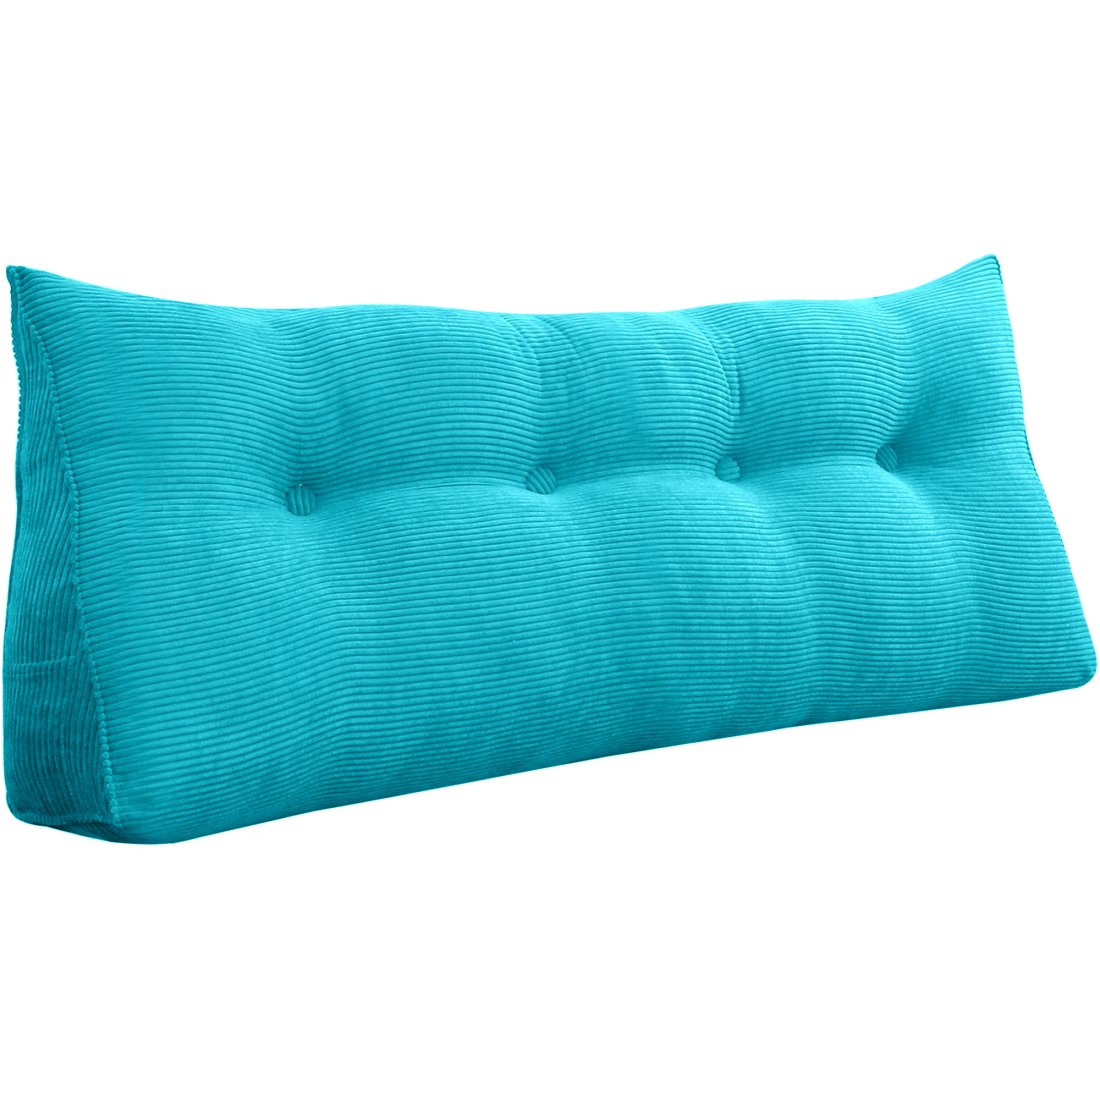 Wedge Pillow - Large Headboard Pillow - Bed Wedge - Cushioned